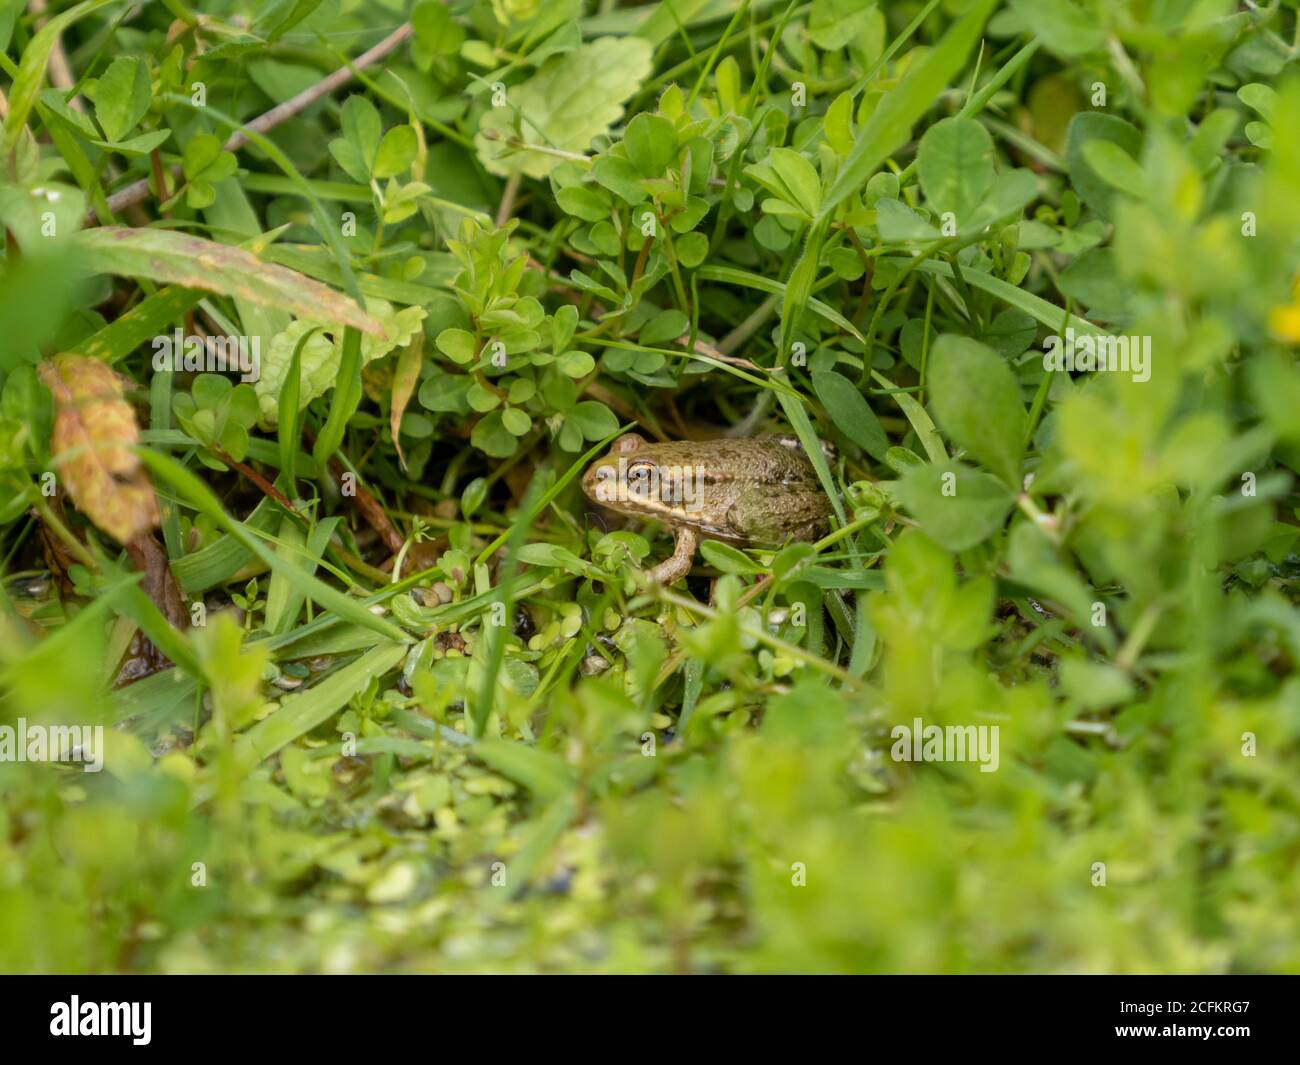 Juvenile Marsh Frog (about 2-3cm)  Sitting on the Edge of a Pond Stock Photo